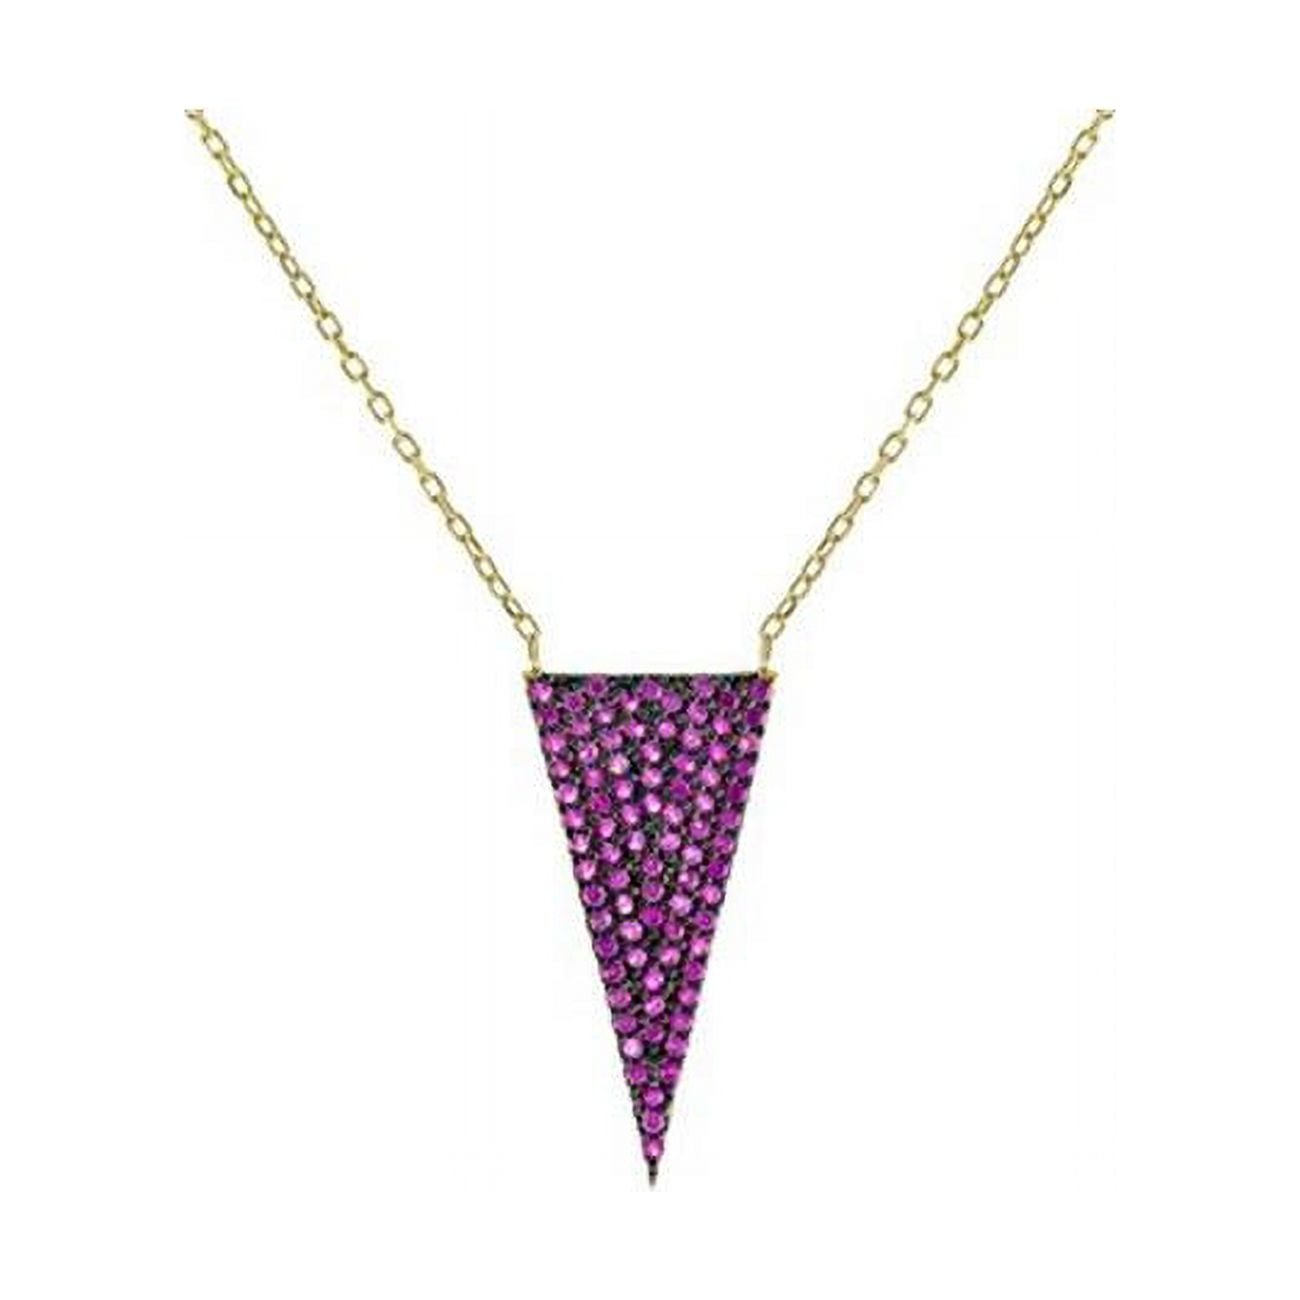 16 In. Plus 2 In. Extension Silver Gold Plated Isoceles Triangle Cubic Zirconia Pendant Necklace, Dark Pink